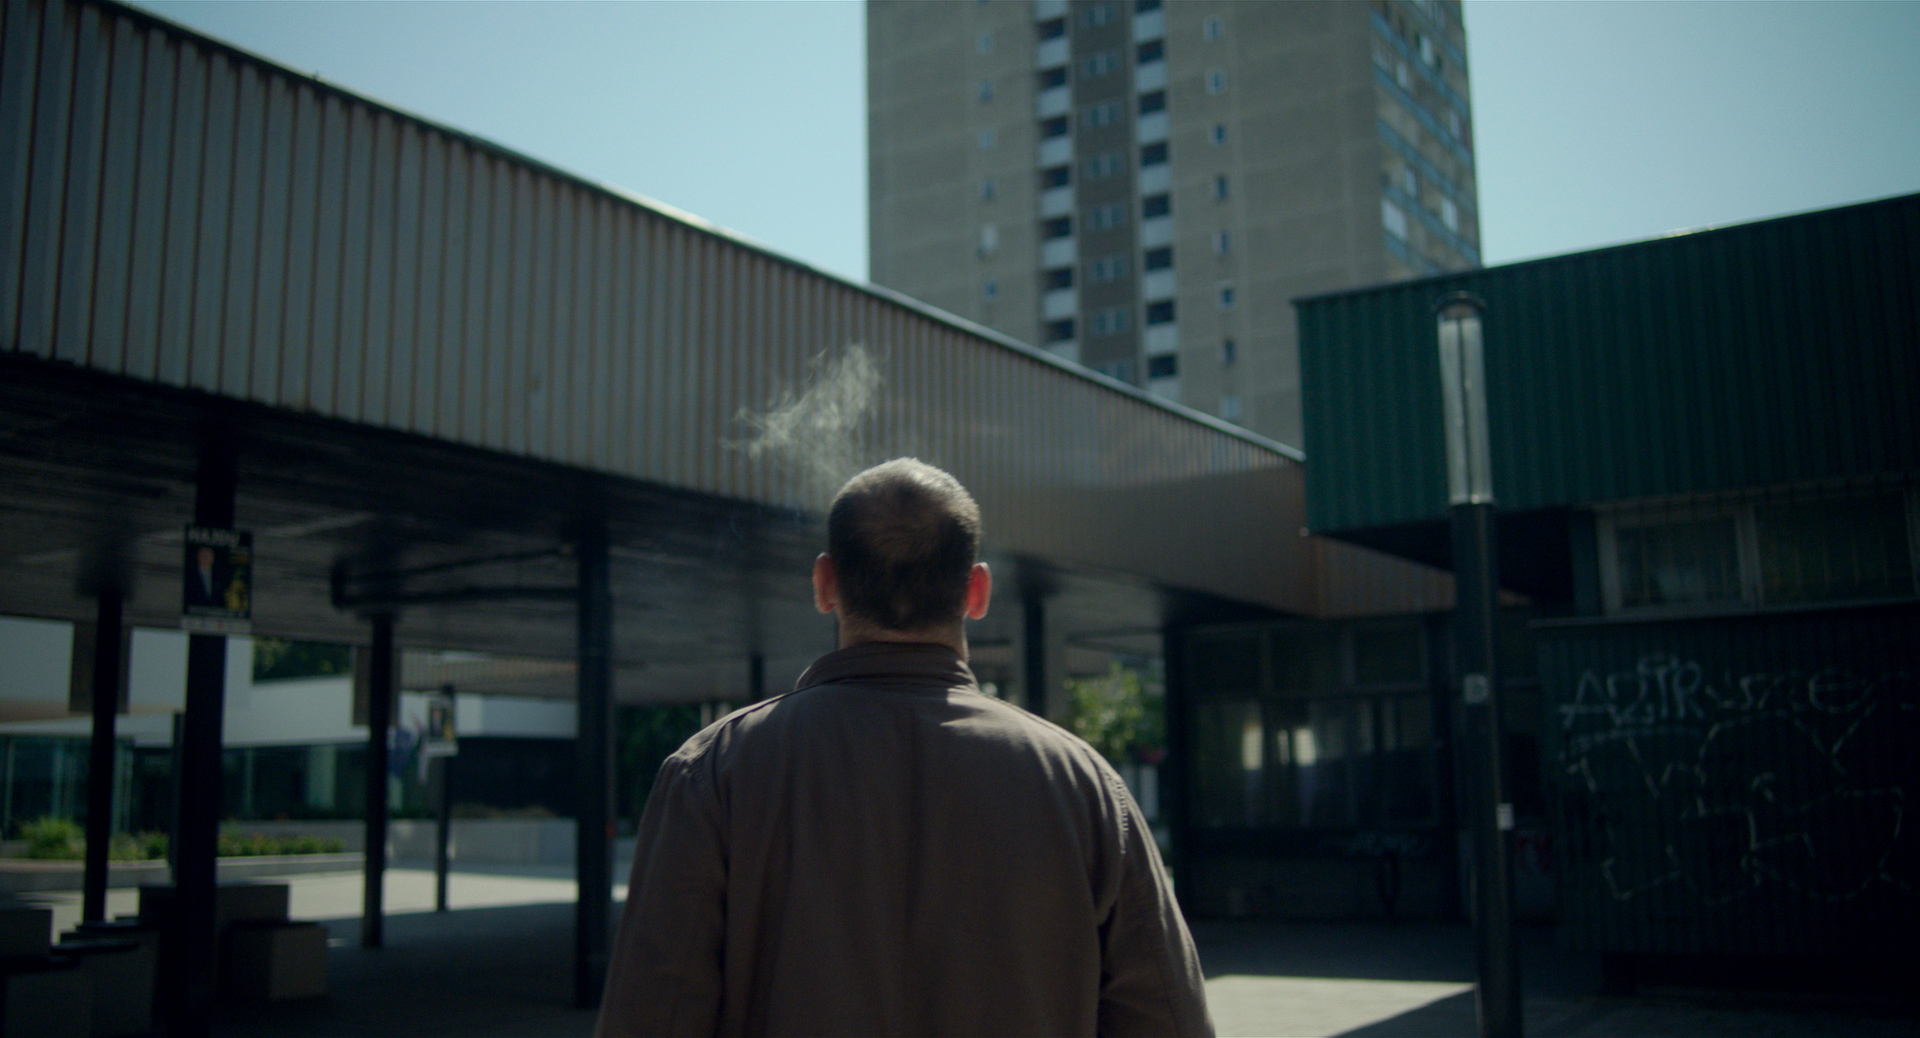 eszter galambos, Still from the short Tiger. Director of Photography, DOP, Cinematographer, operatőr: Eszter Galambos. Director: Péter Hajmási. Colorist: Anna Stalter, Cast: Milán SchruffLong dolly shot on a detective. He is walking between the block houses